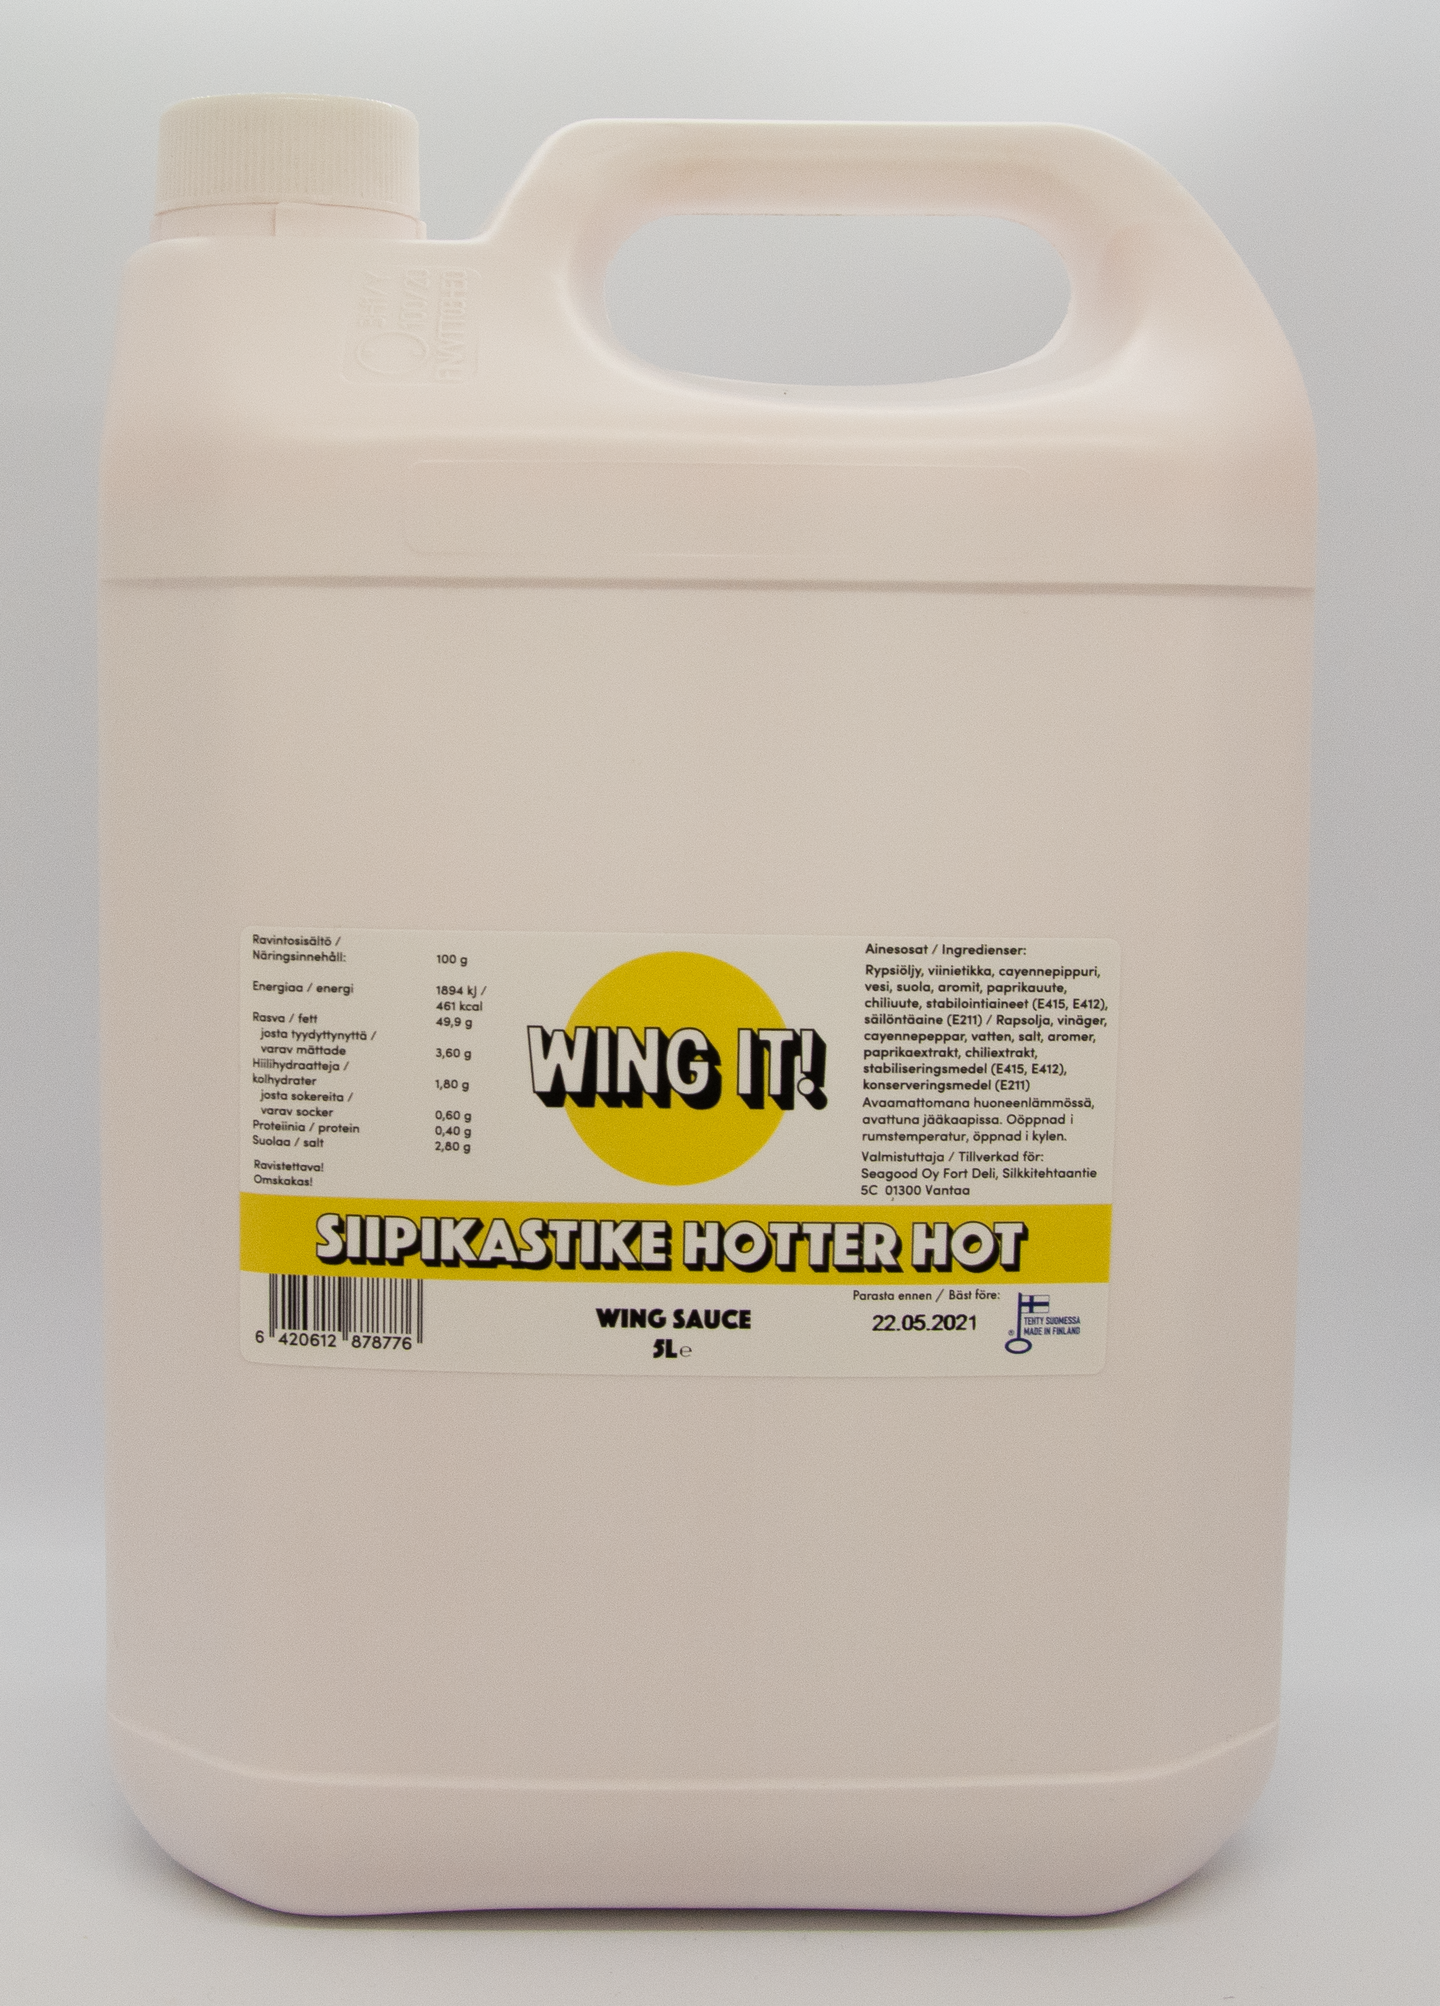 Wing It! Siipikastike Hotter Hot 5l